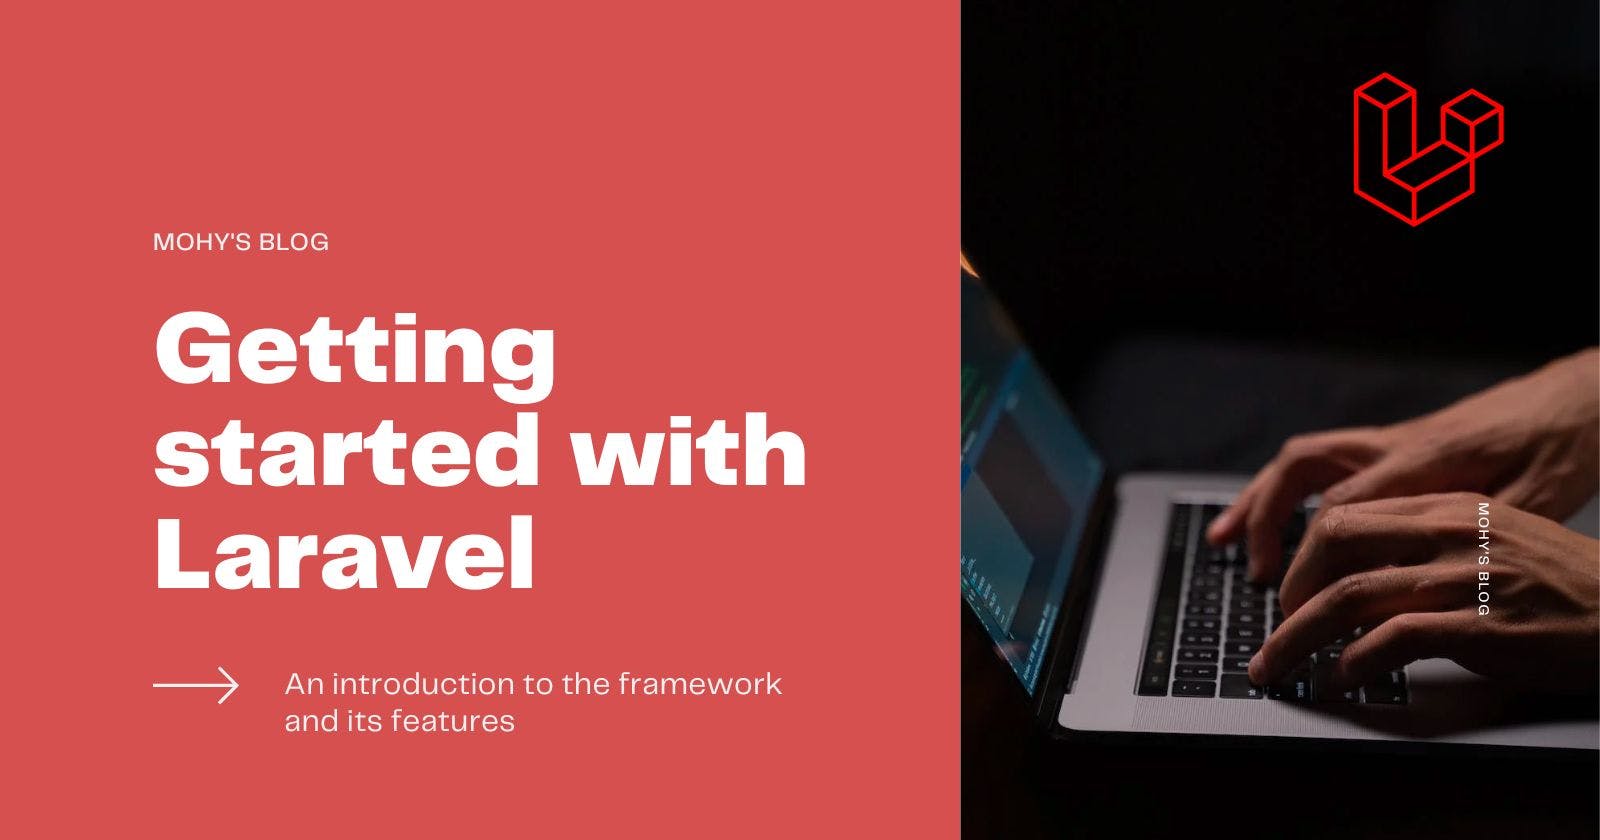 Getting started with Laravel: An introduction to the framework and its features